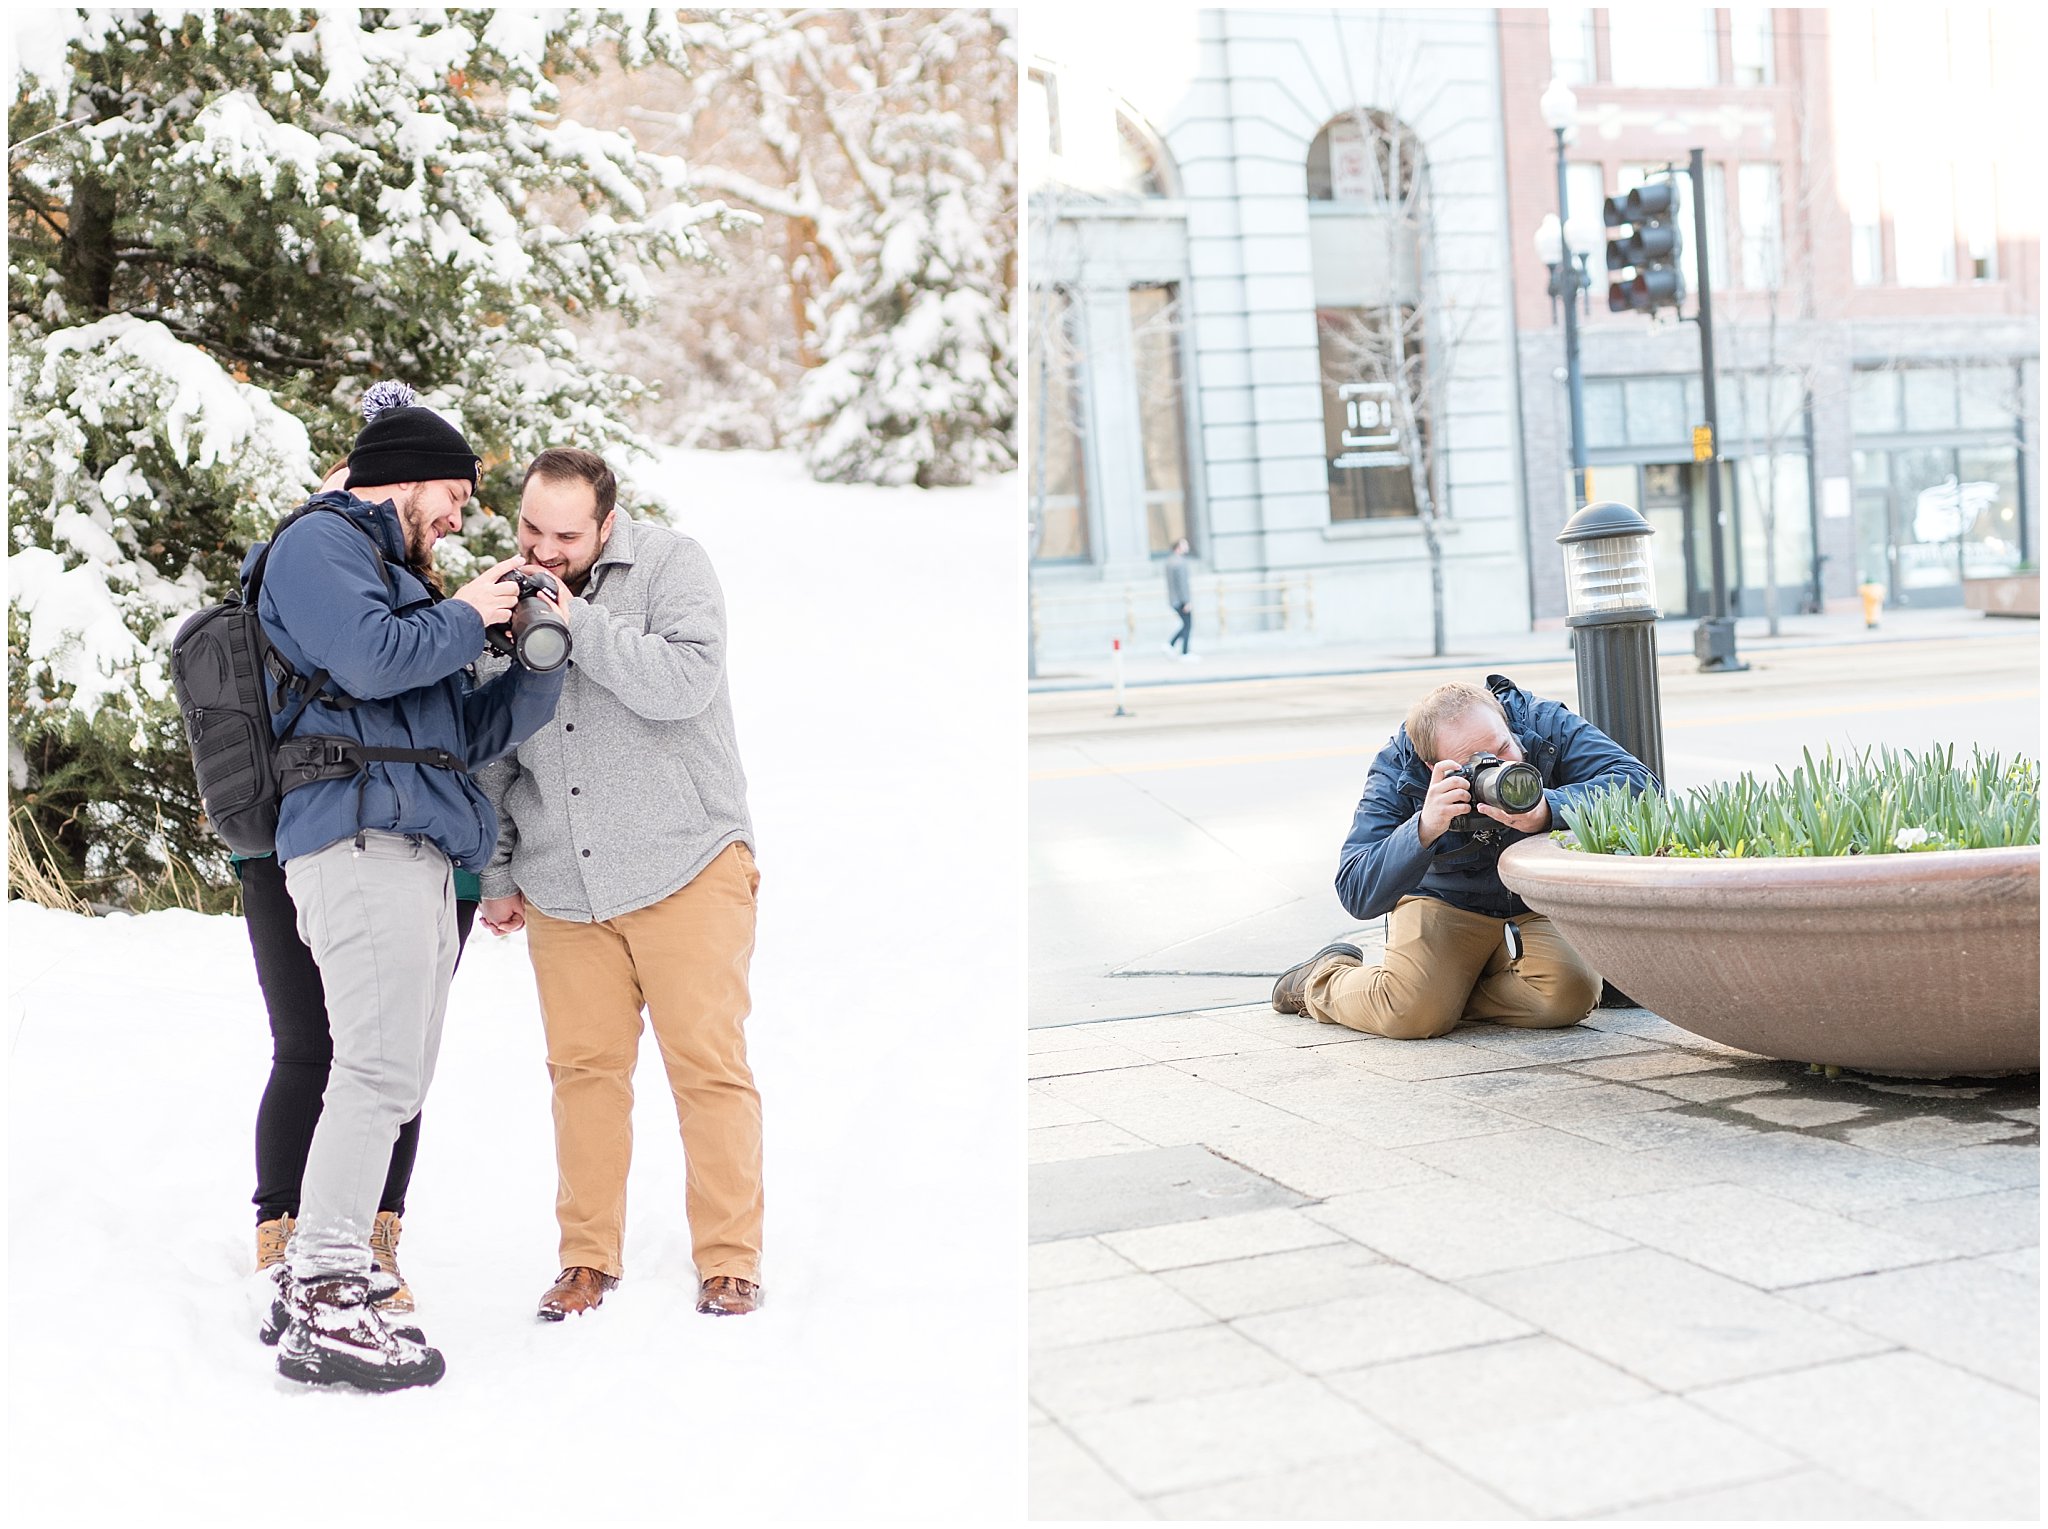 Utah Photographers at Mueller Park and in Salt Lake City | Husband and Wife Photography Team | Jessie and Dallin Photography